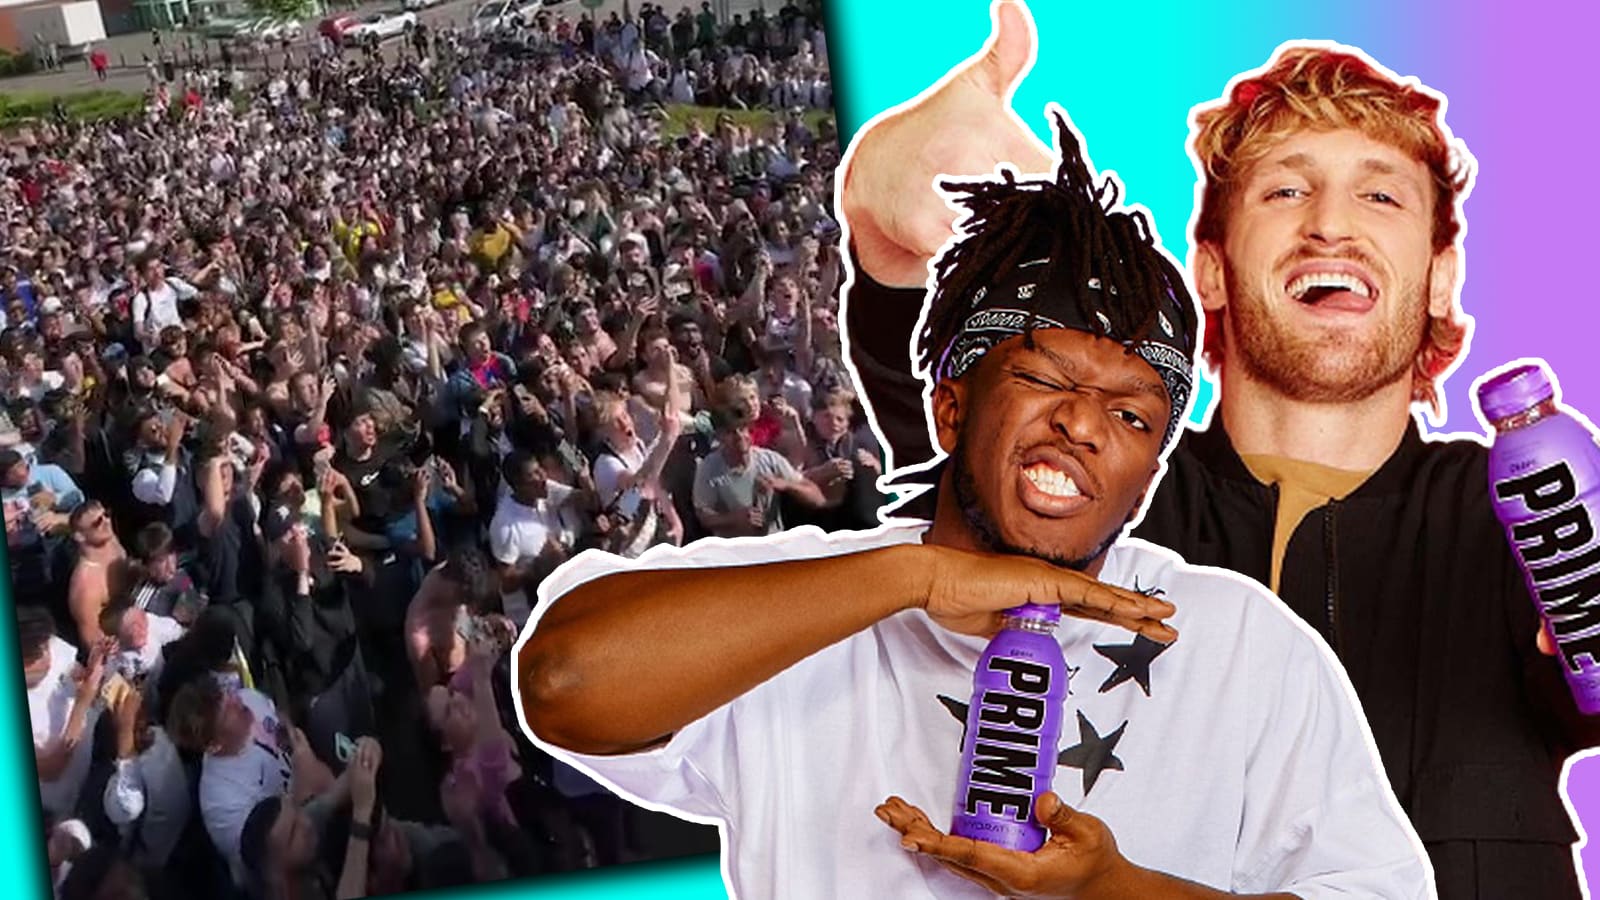 KSI and Logan Paul's Prime drink to 'finally' be sold at Tesco